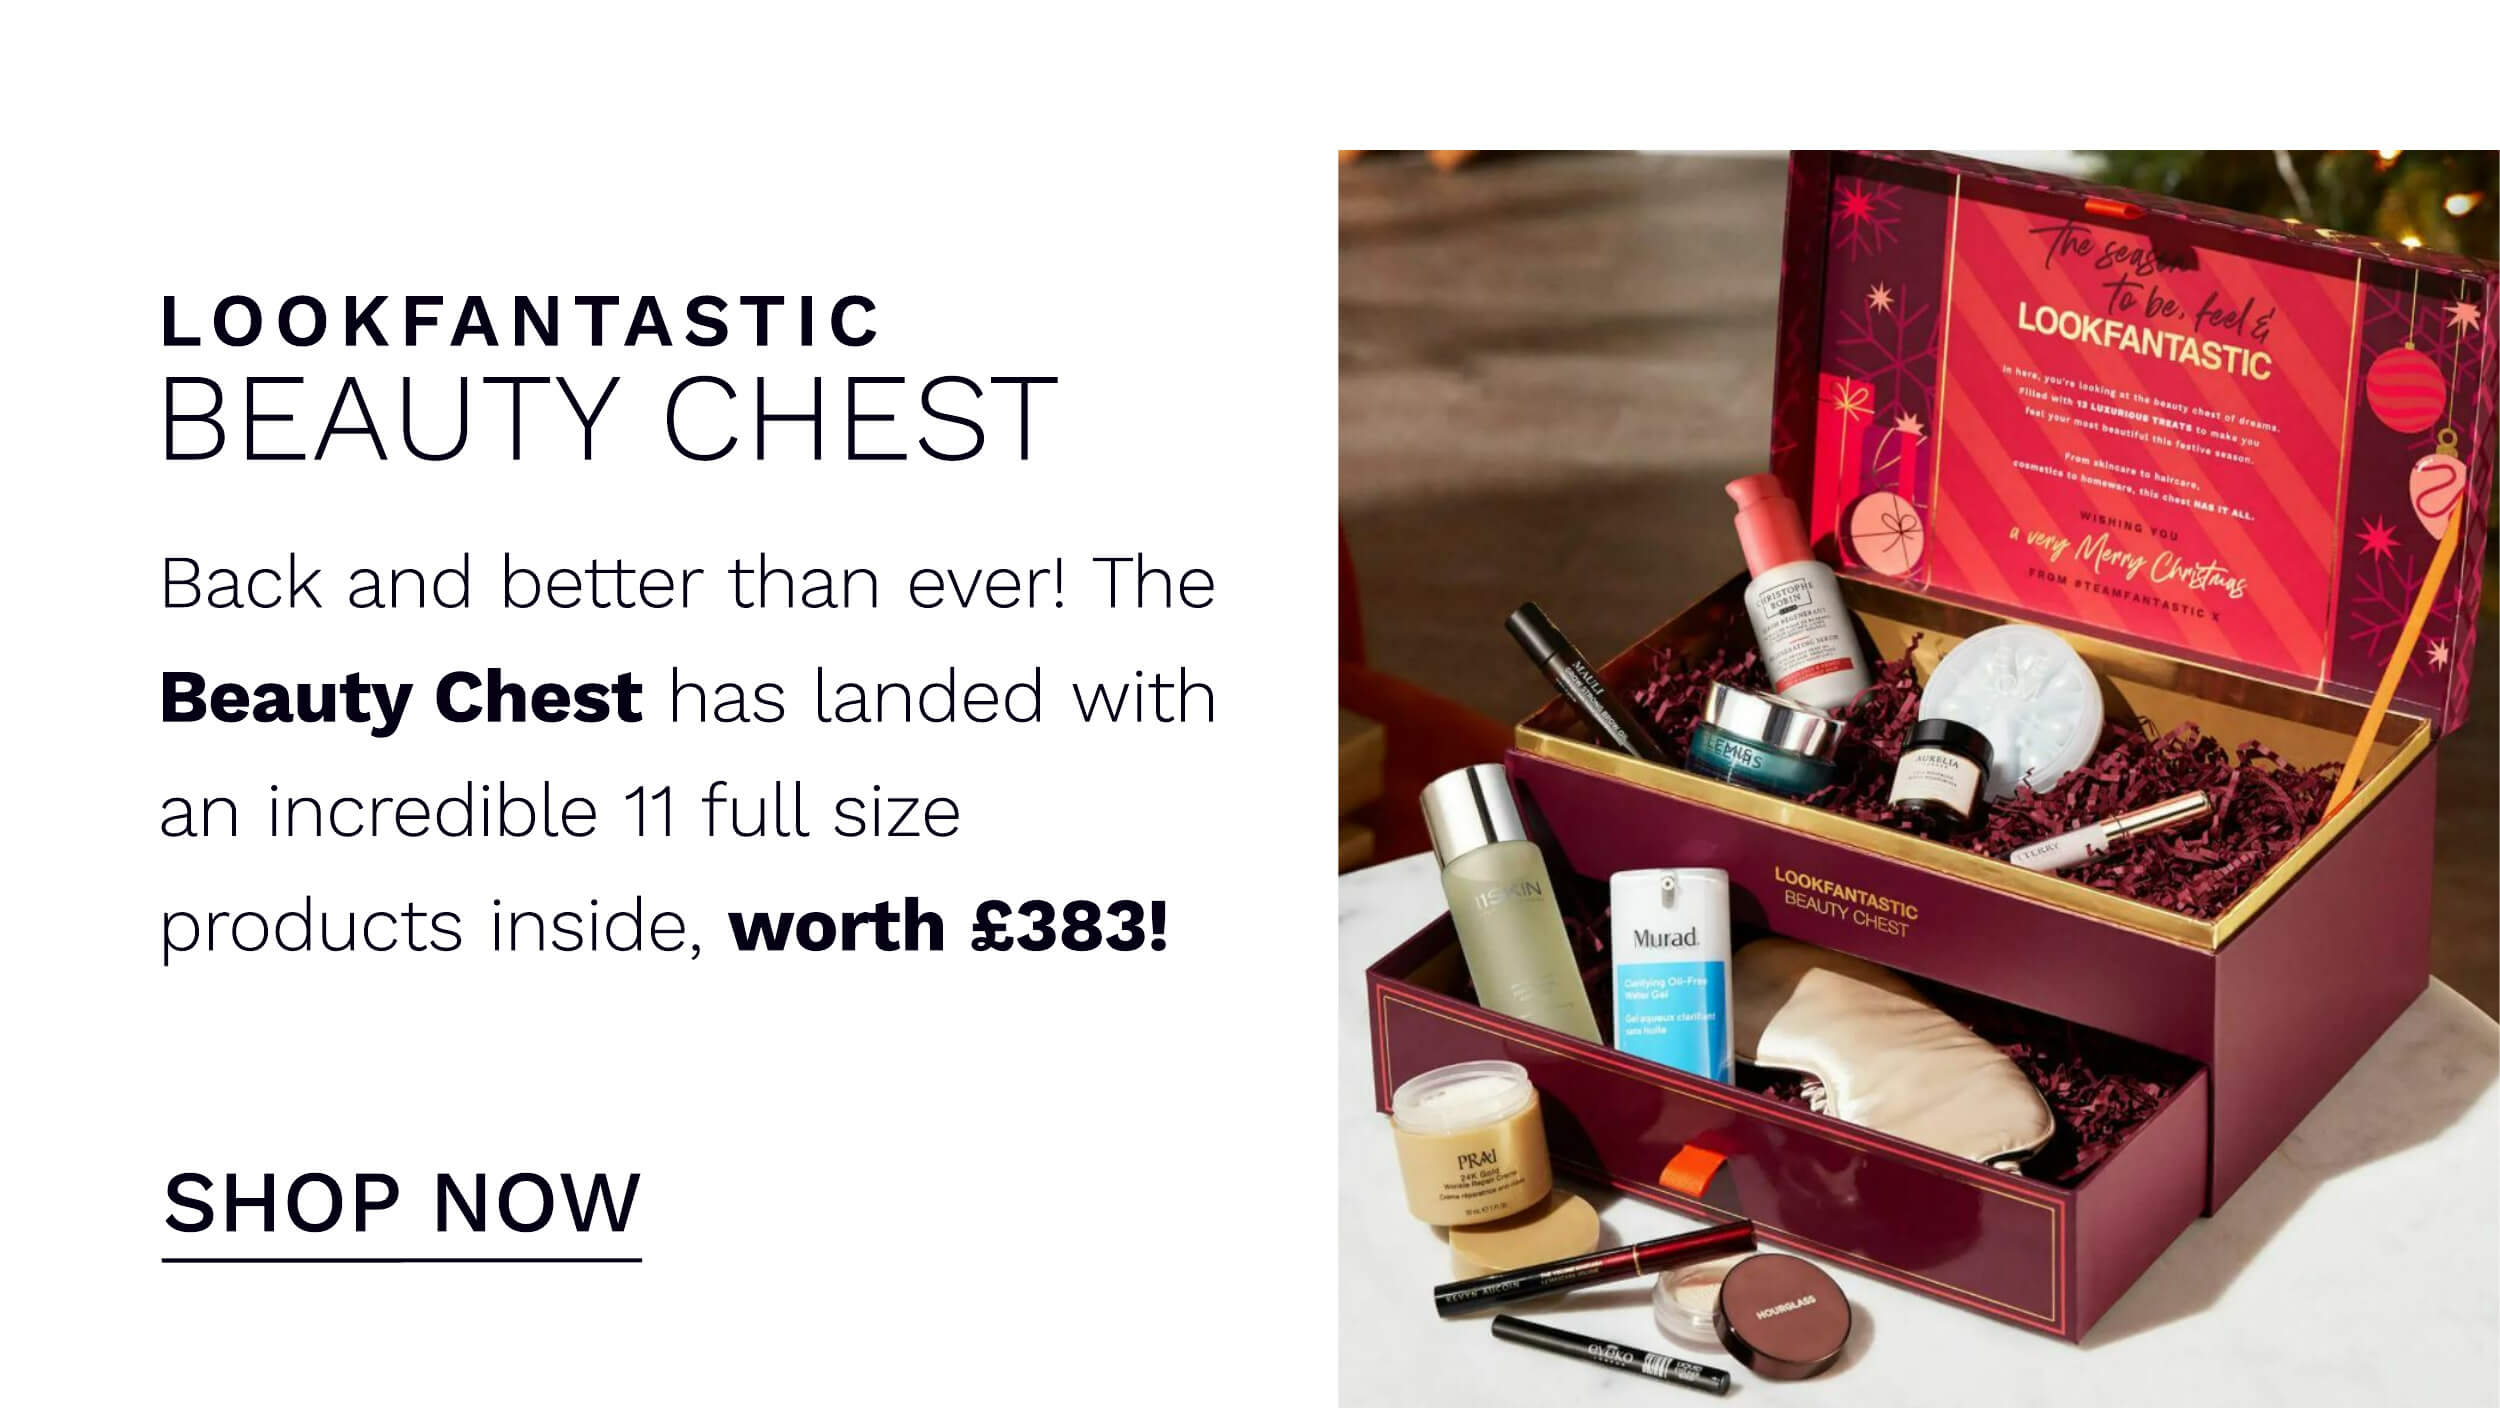 Lookfantastic Beauty Chest WORTH 383 POUND